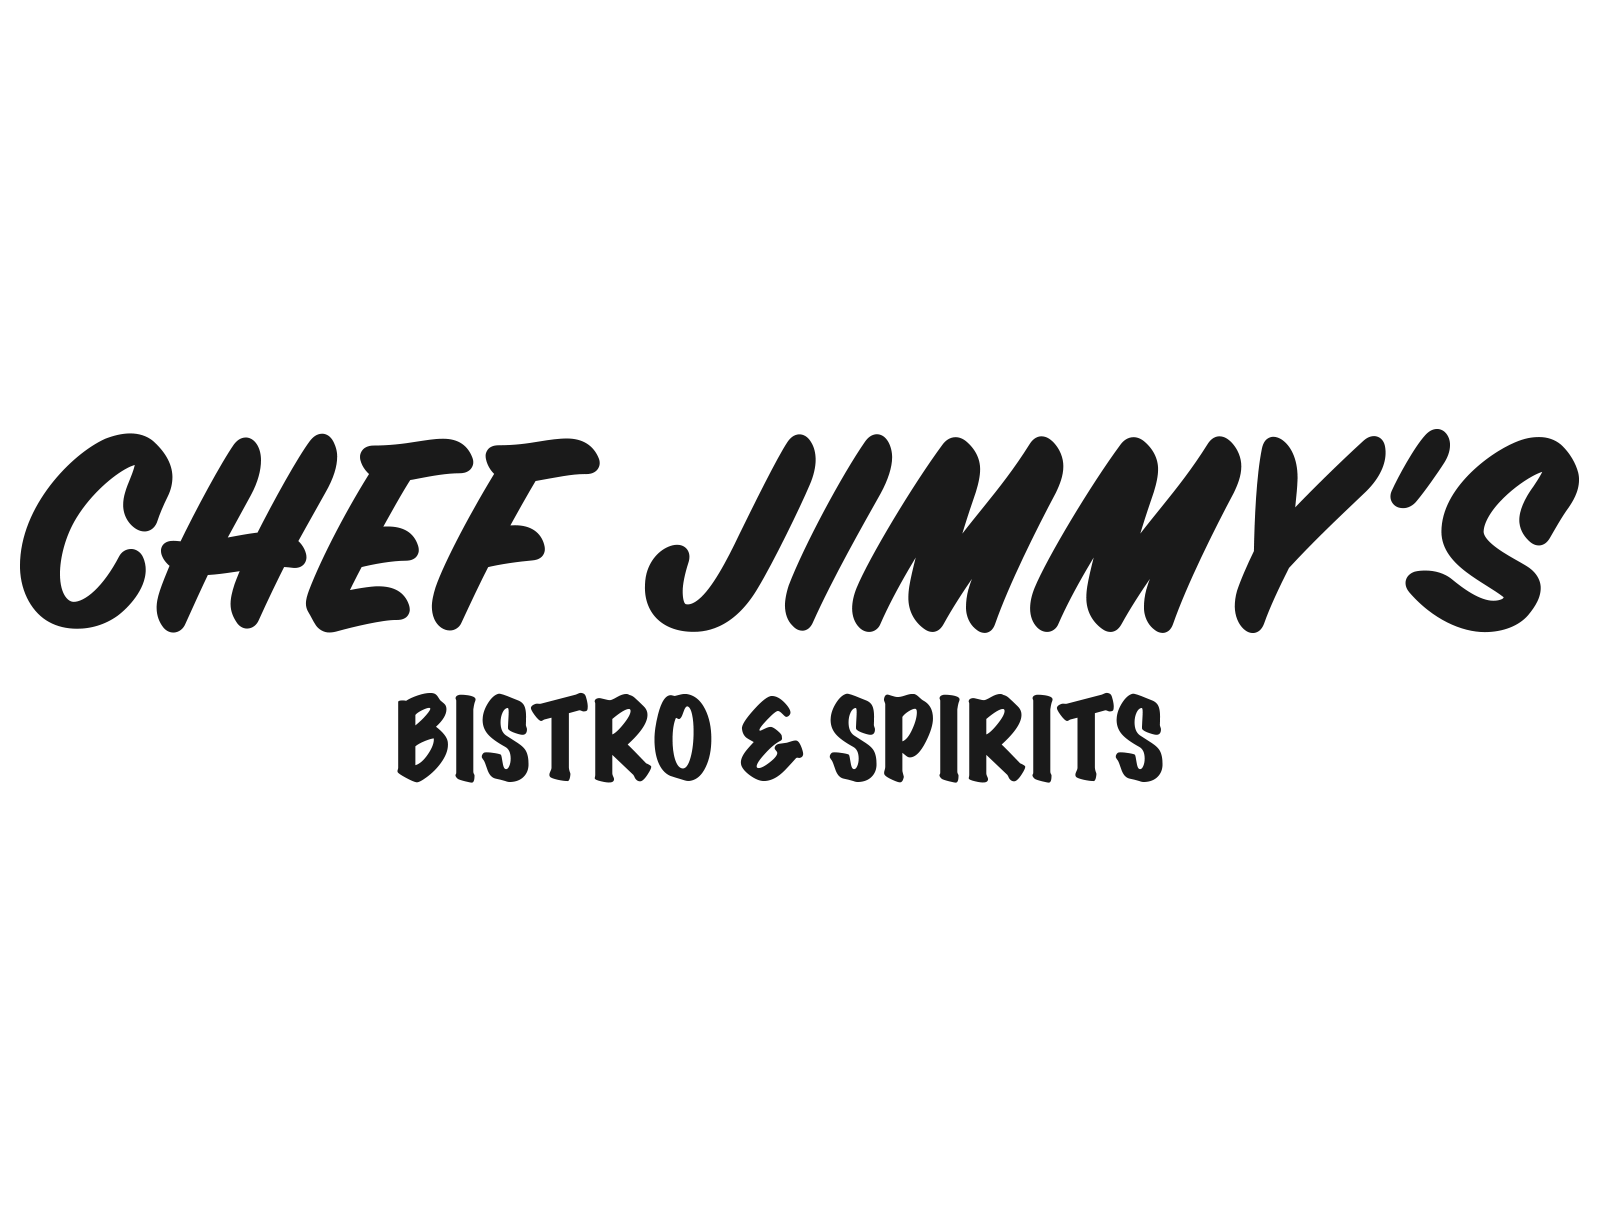 ChefJimmy's.png